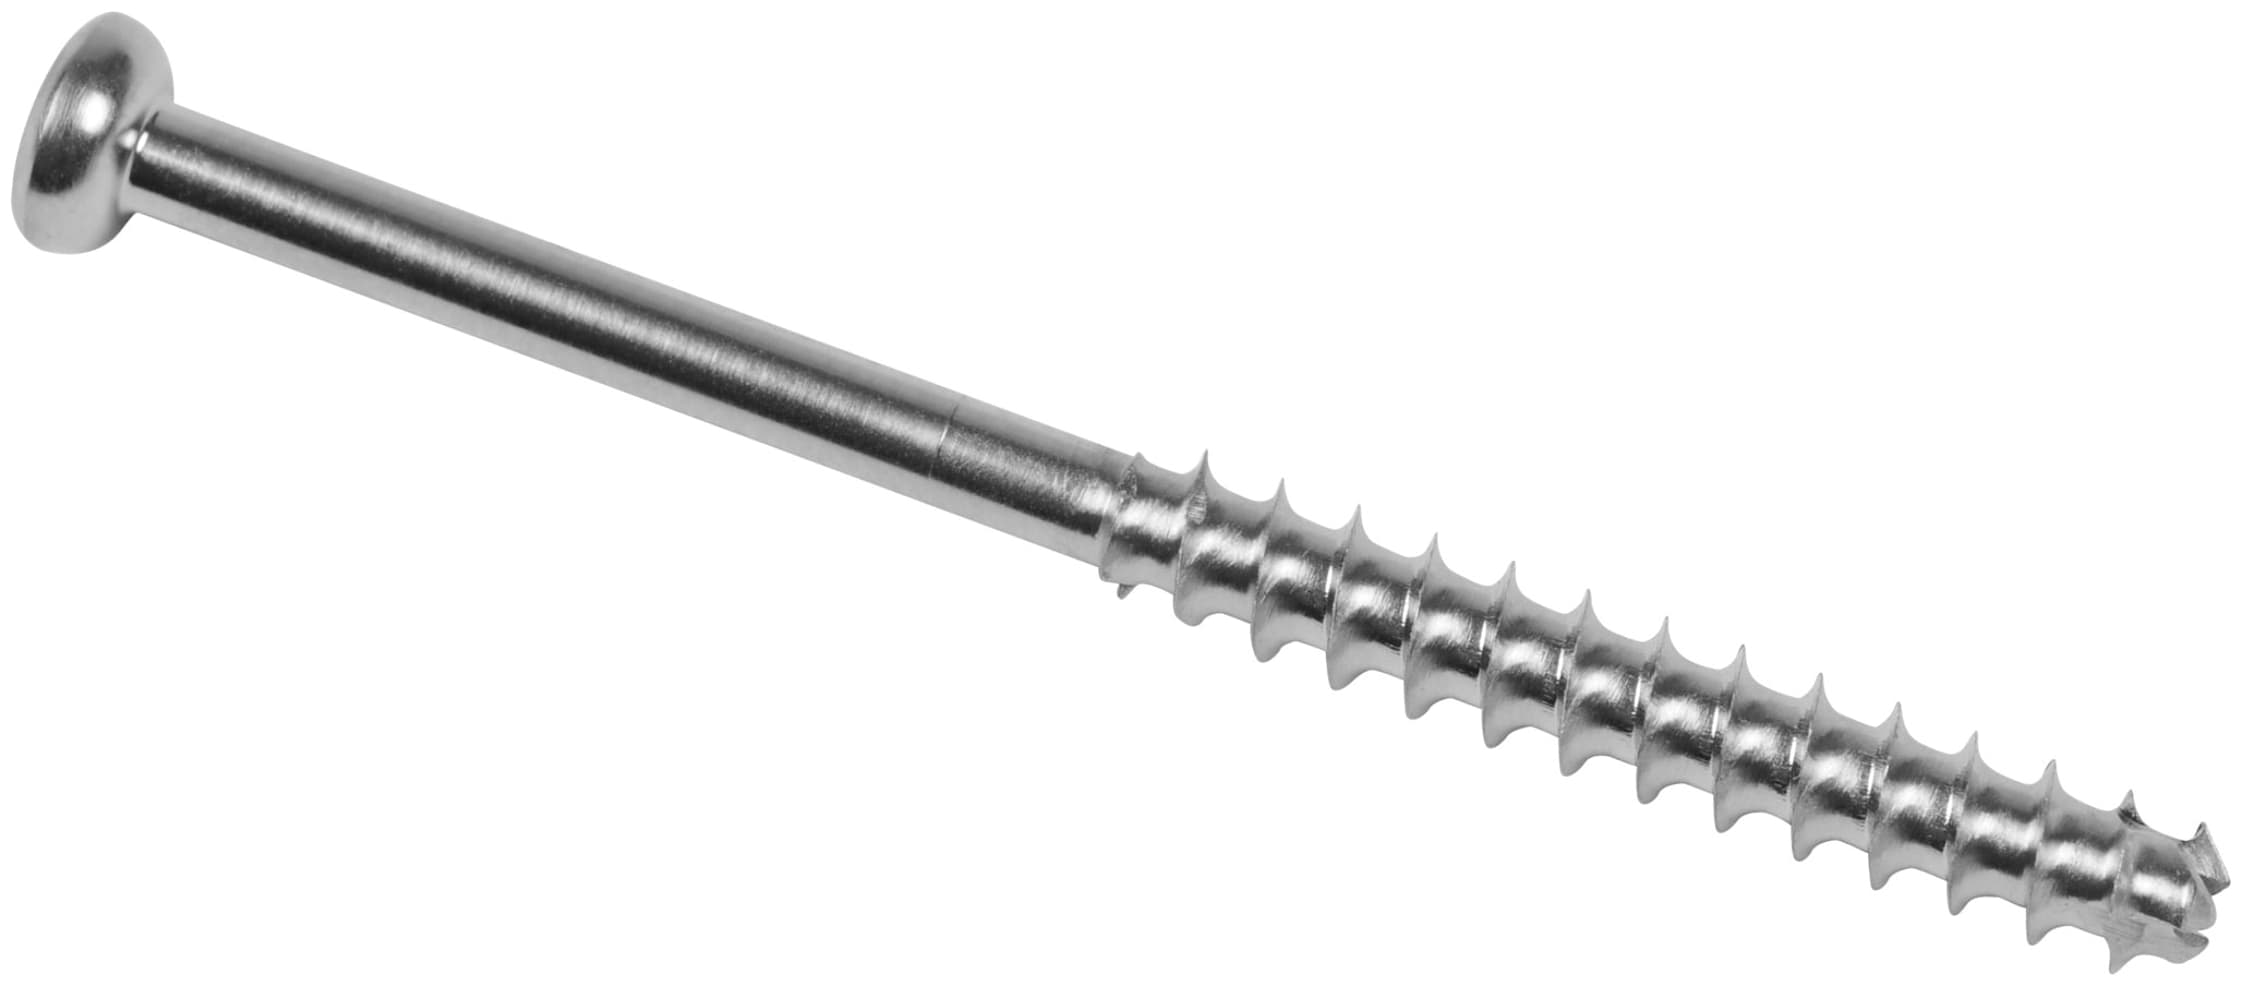 Low Profile Screw, SS, 4.0 x 50 mm, Cannulated, Long Thread